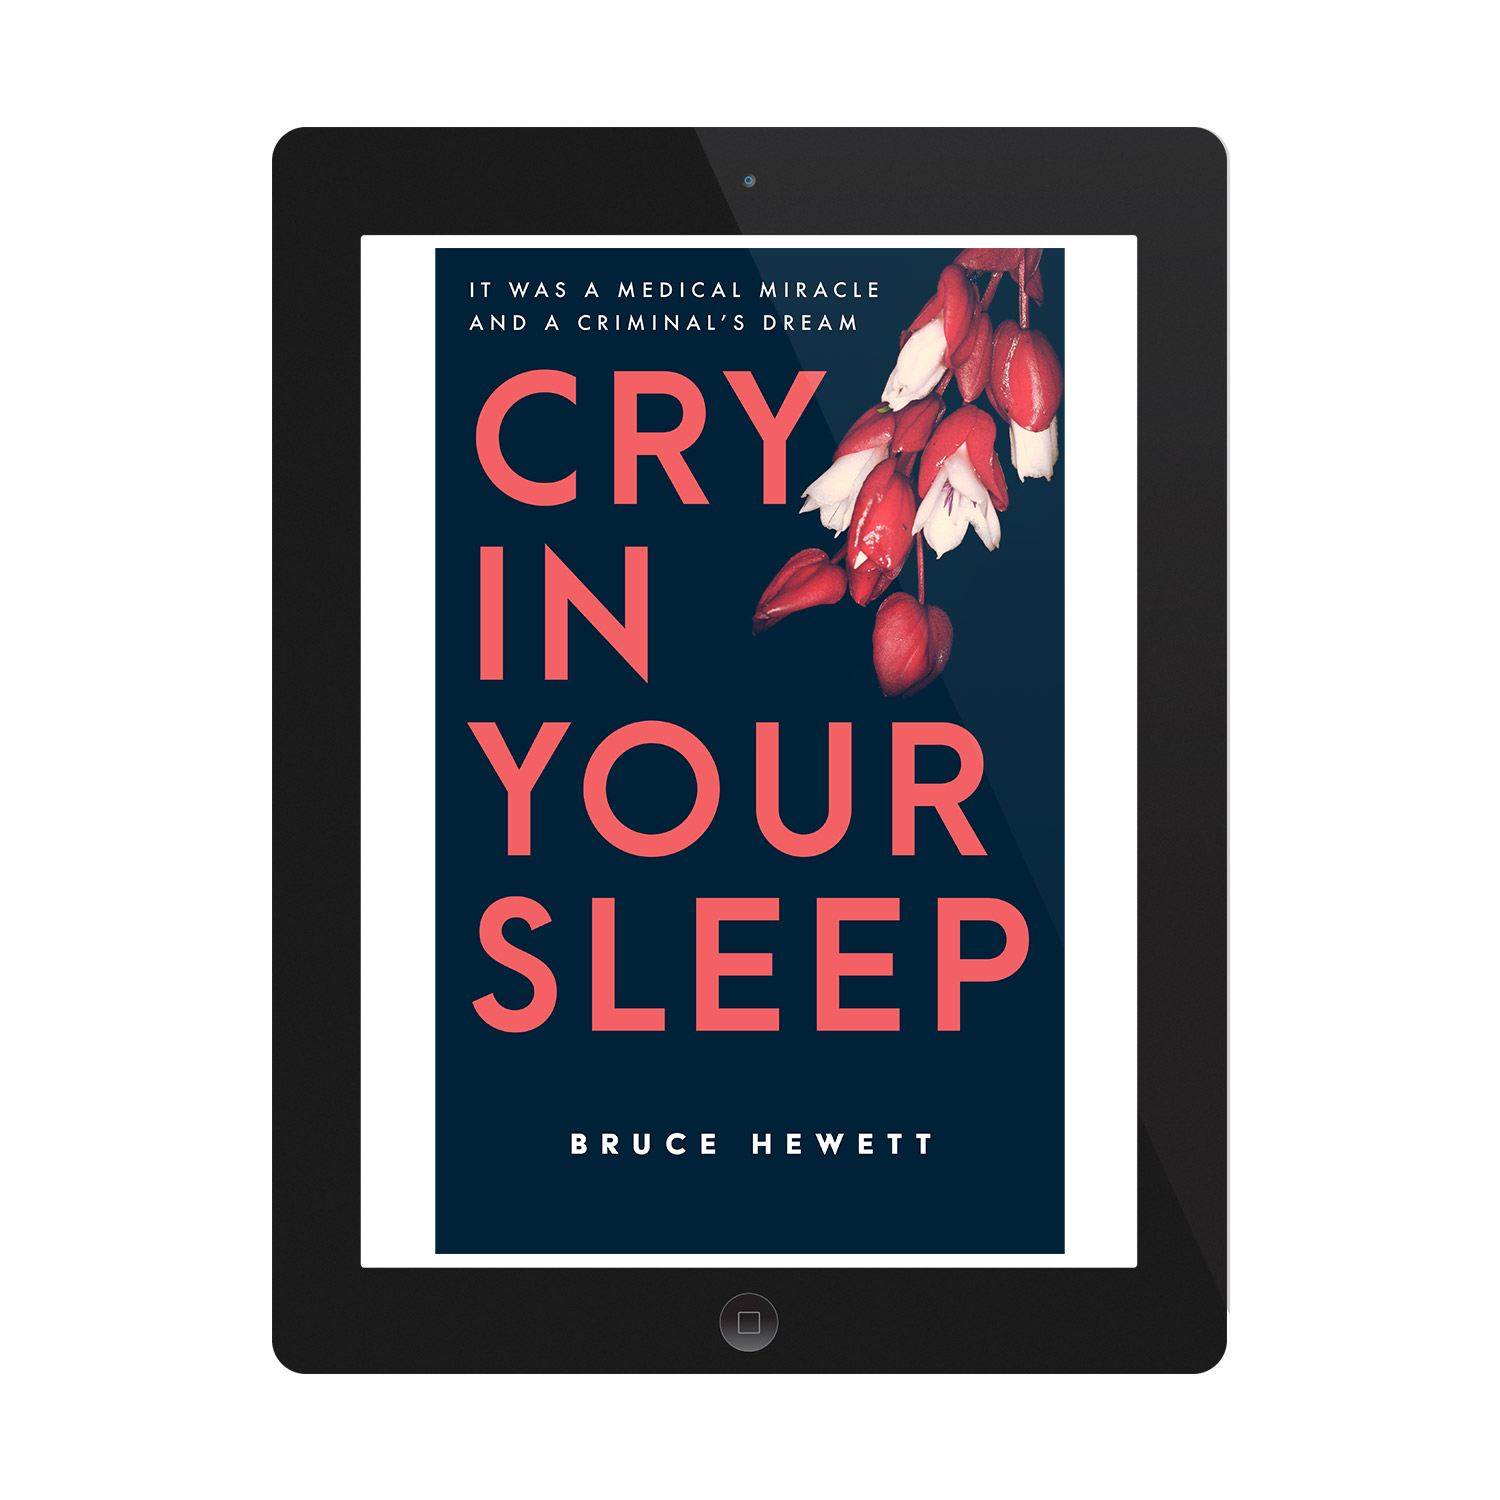 'Cry In Your Sleep' is cracking modern pharma crime thriller. The author is Bruce Hewett. The book cover design and interior formatting are by Mark Thomas. To learn more about what Mark could do for your book, please visit coverness.com